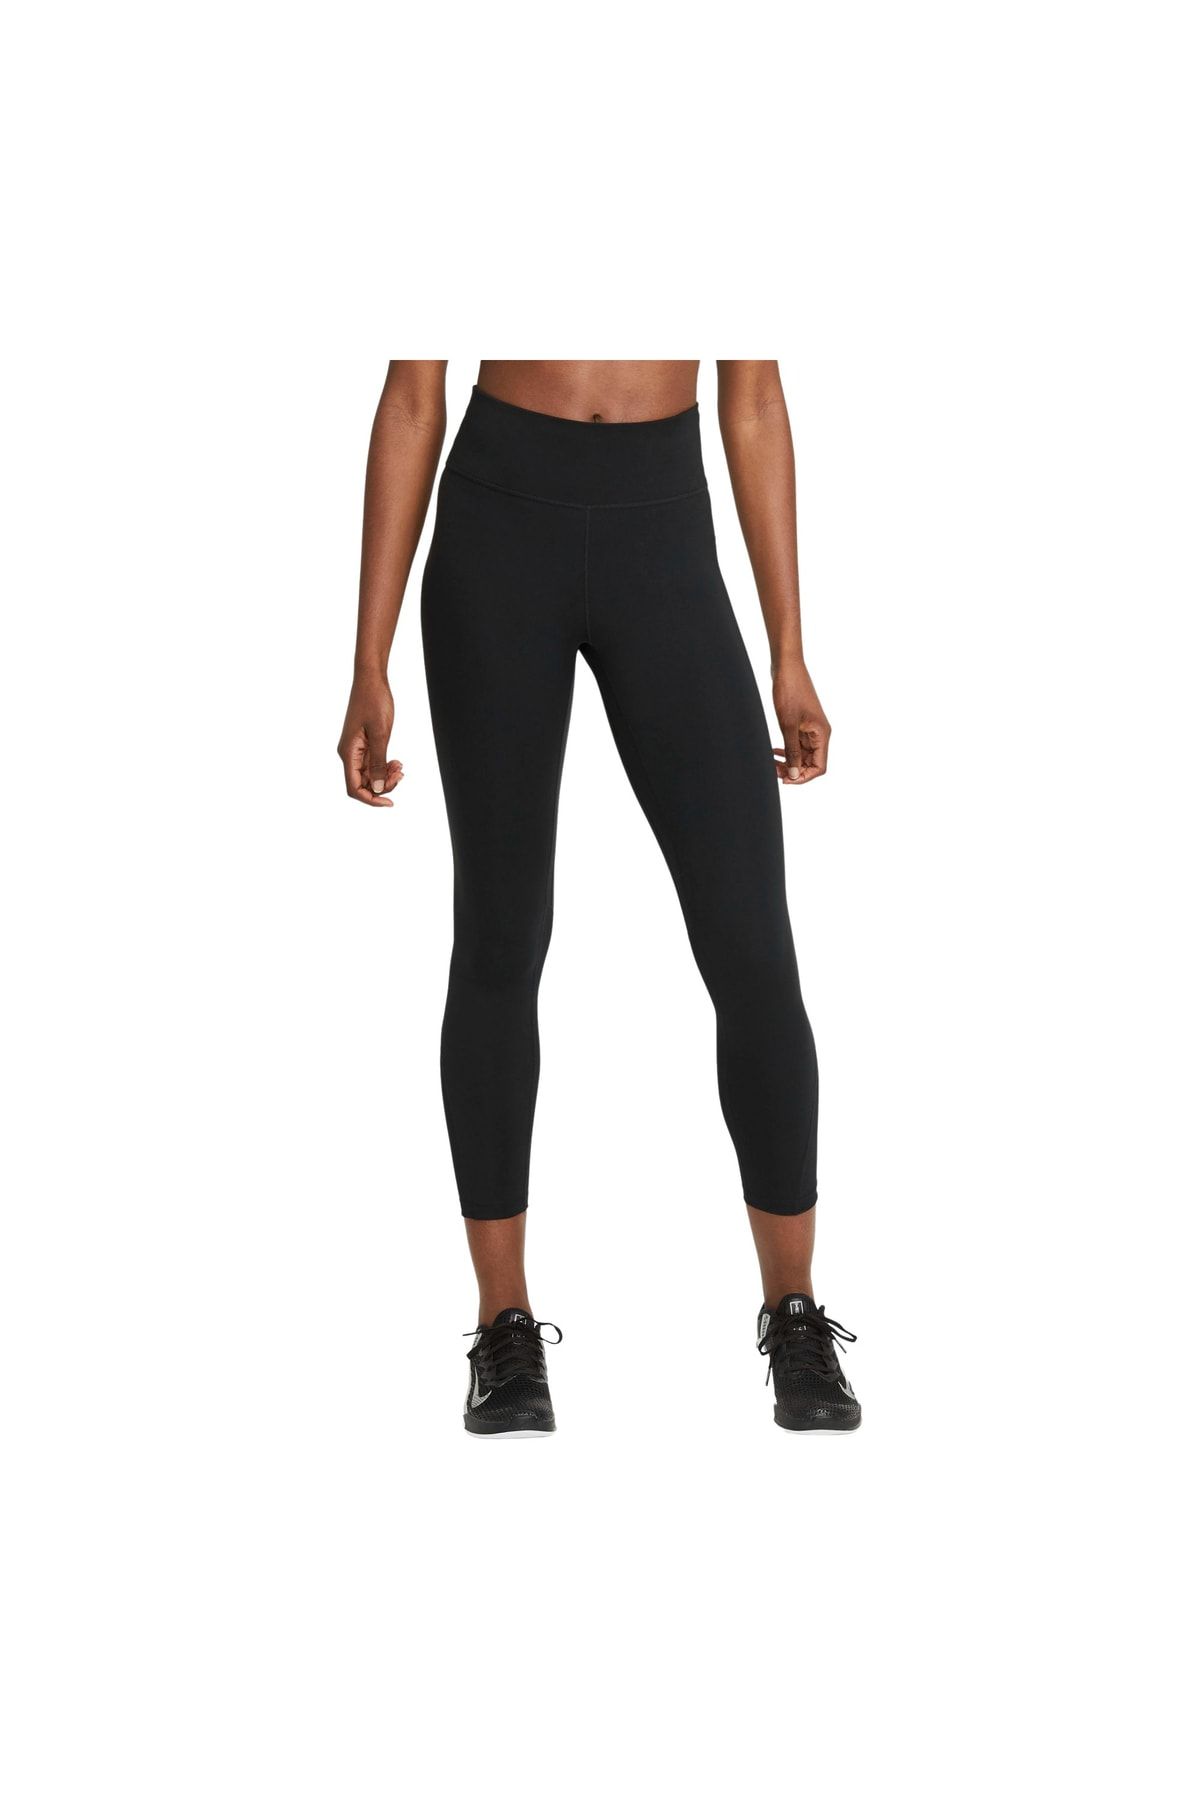 Nike Dd0249-010 One Mid-rise 7/8 Tights Women's Tights - Trendyol